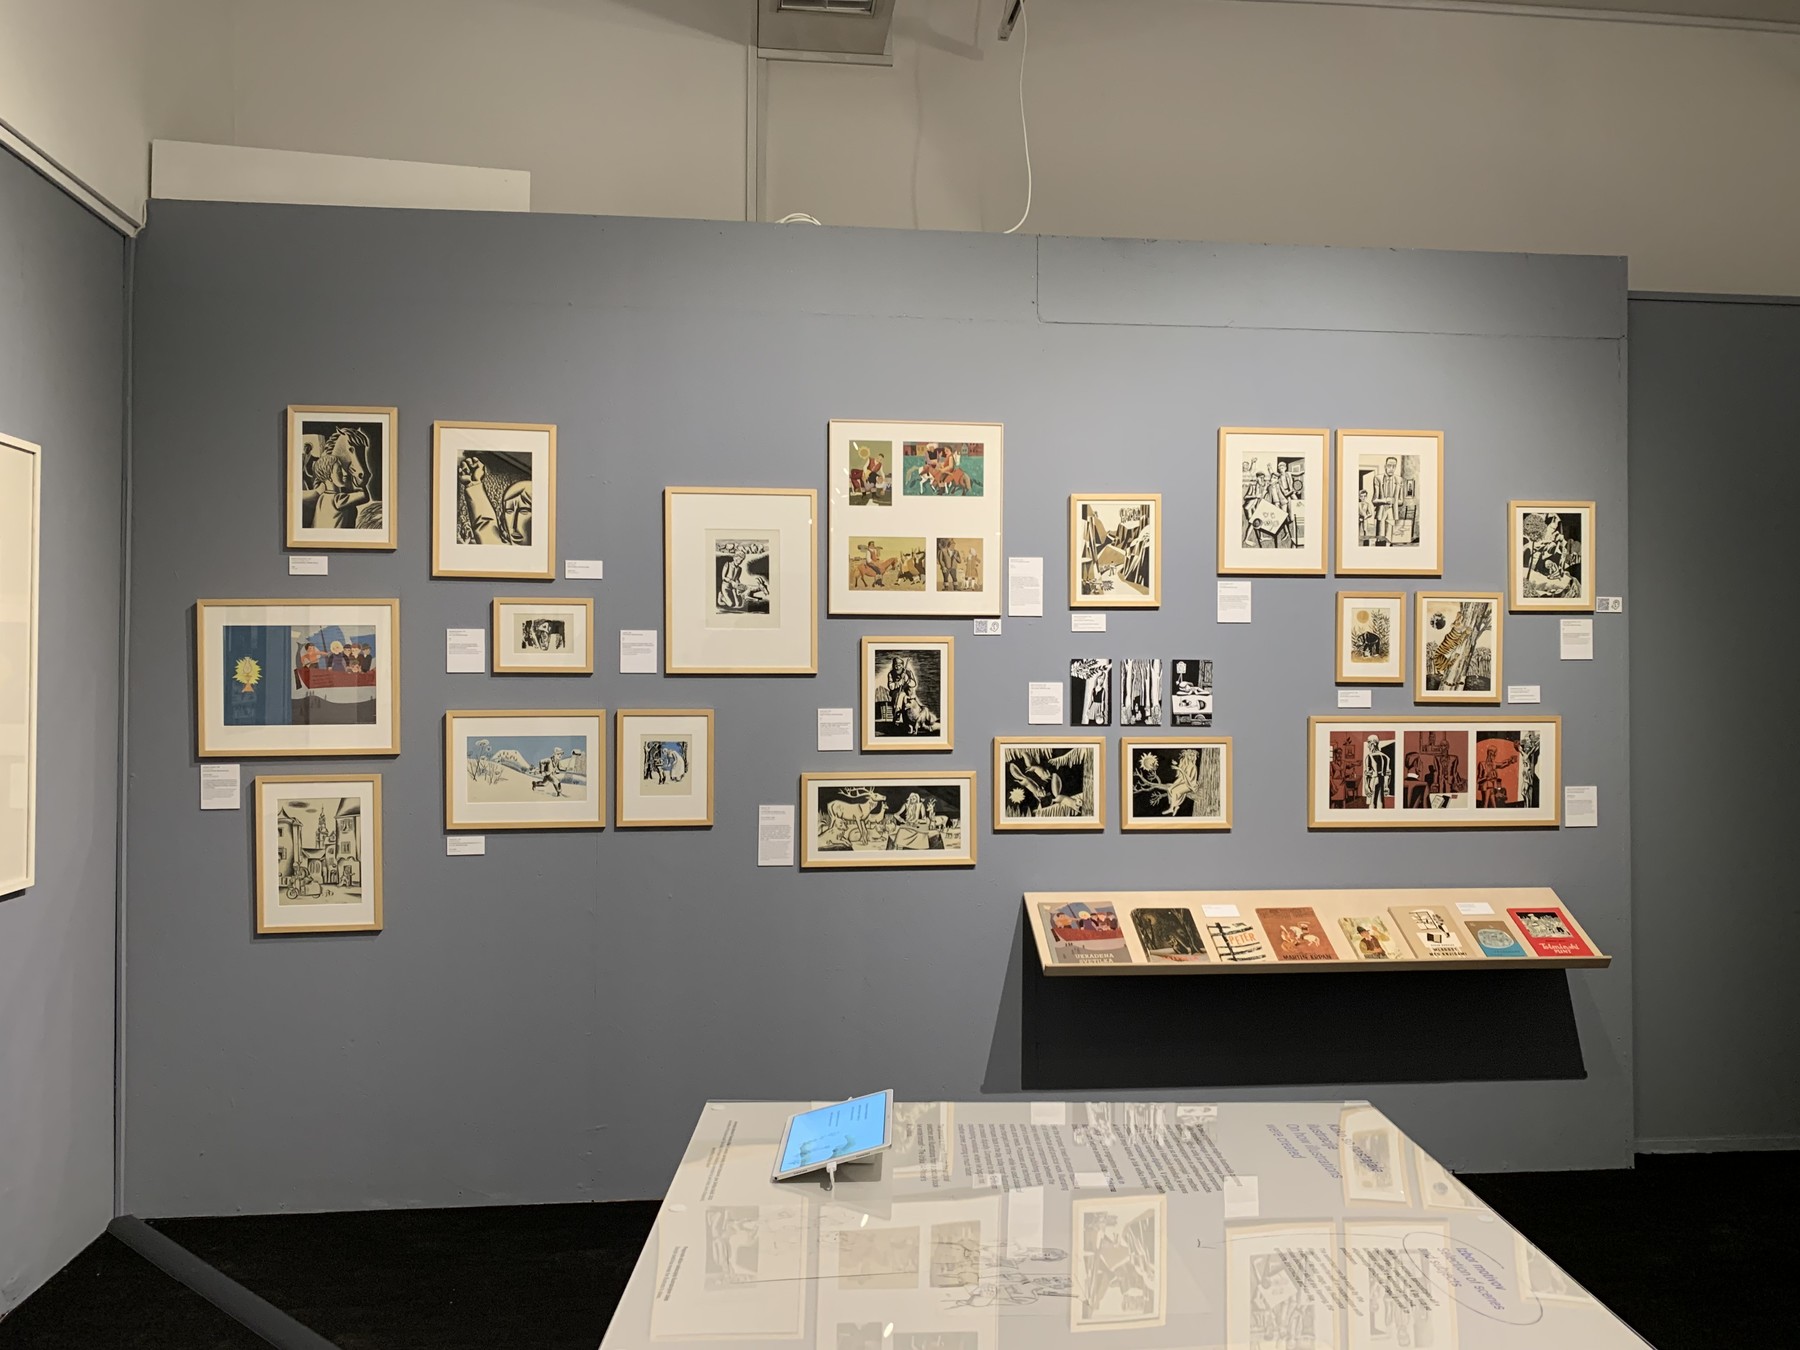 Guided Tour of the Exhibition Ive Šubic – Illustrator and Cultural Figure